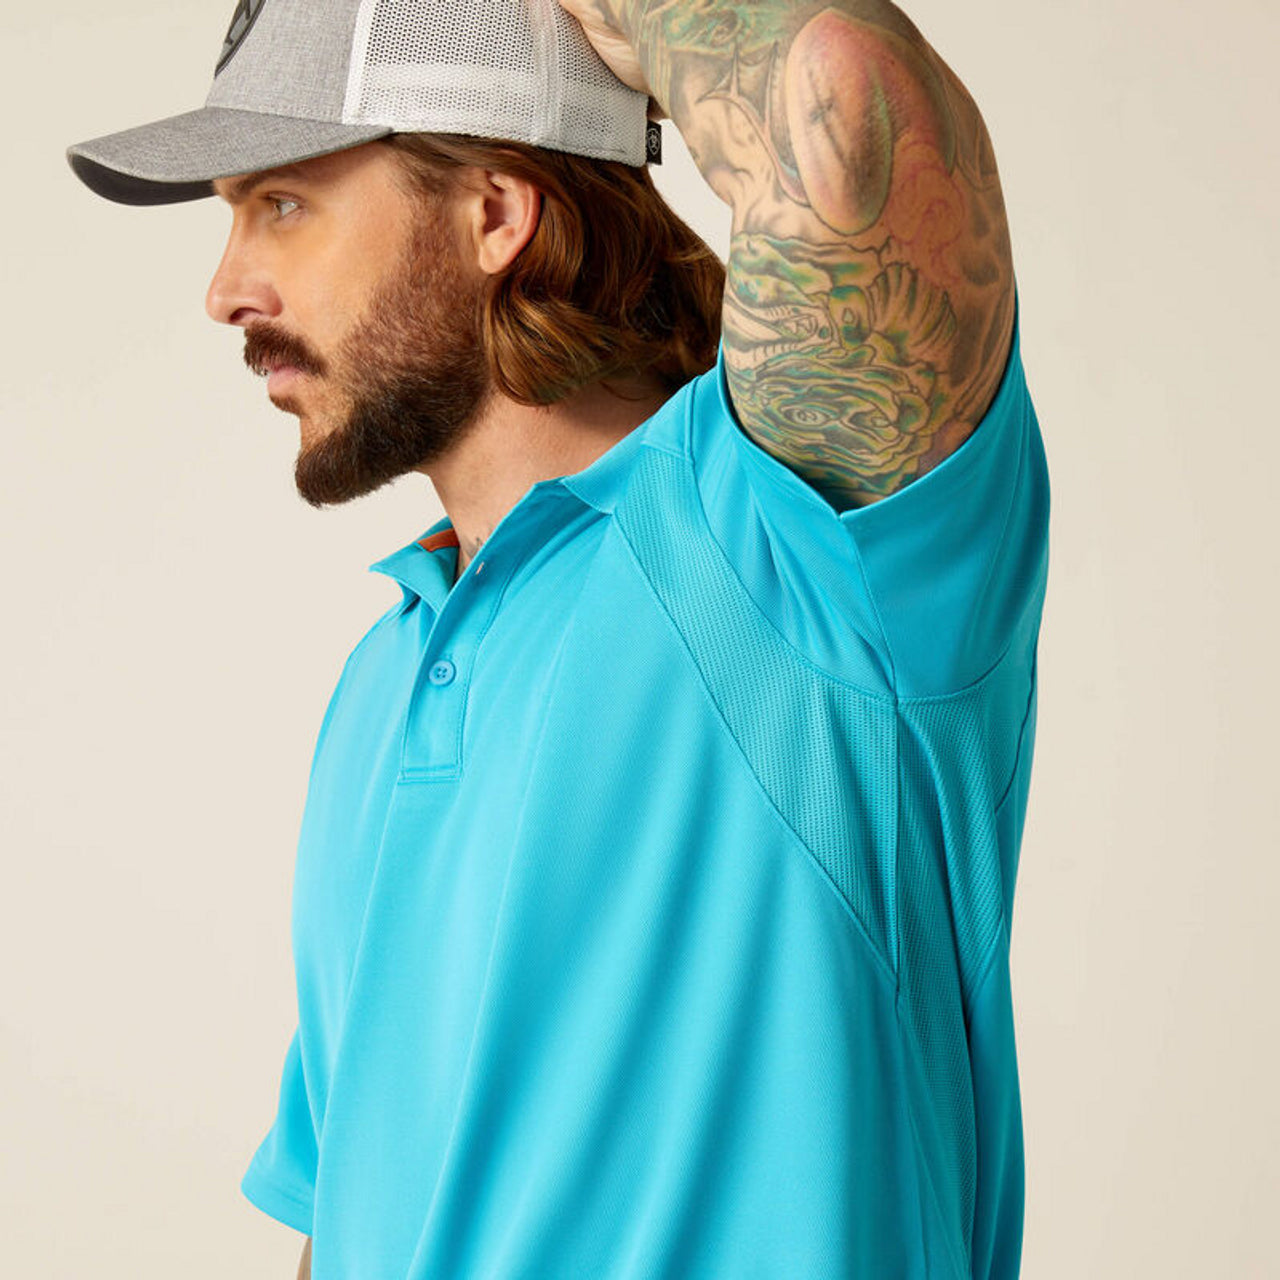 Ariat Men's Advanced Comfort Short Sleeve Polo Shirt - Turquoise Reef